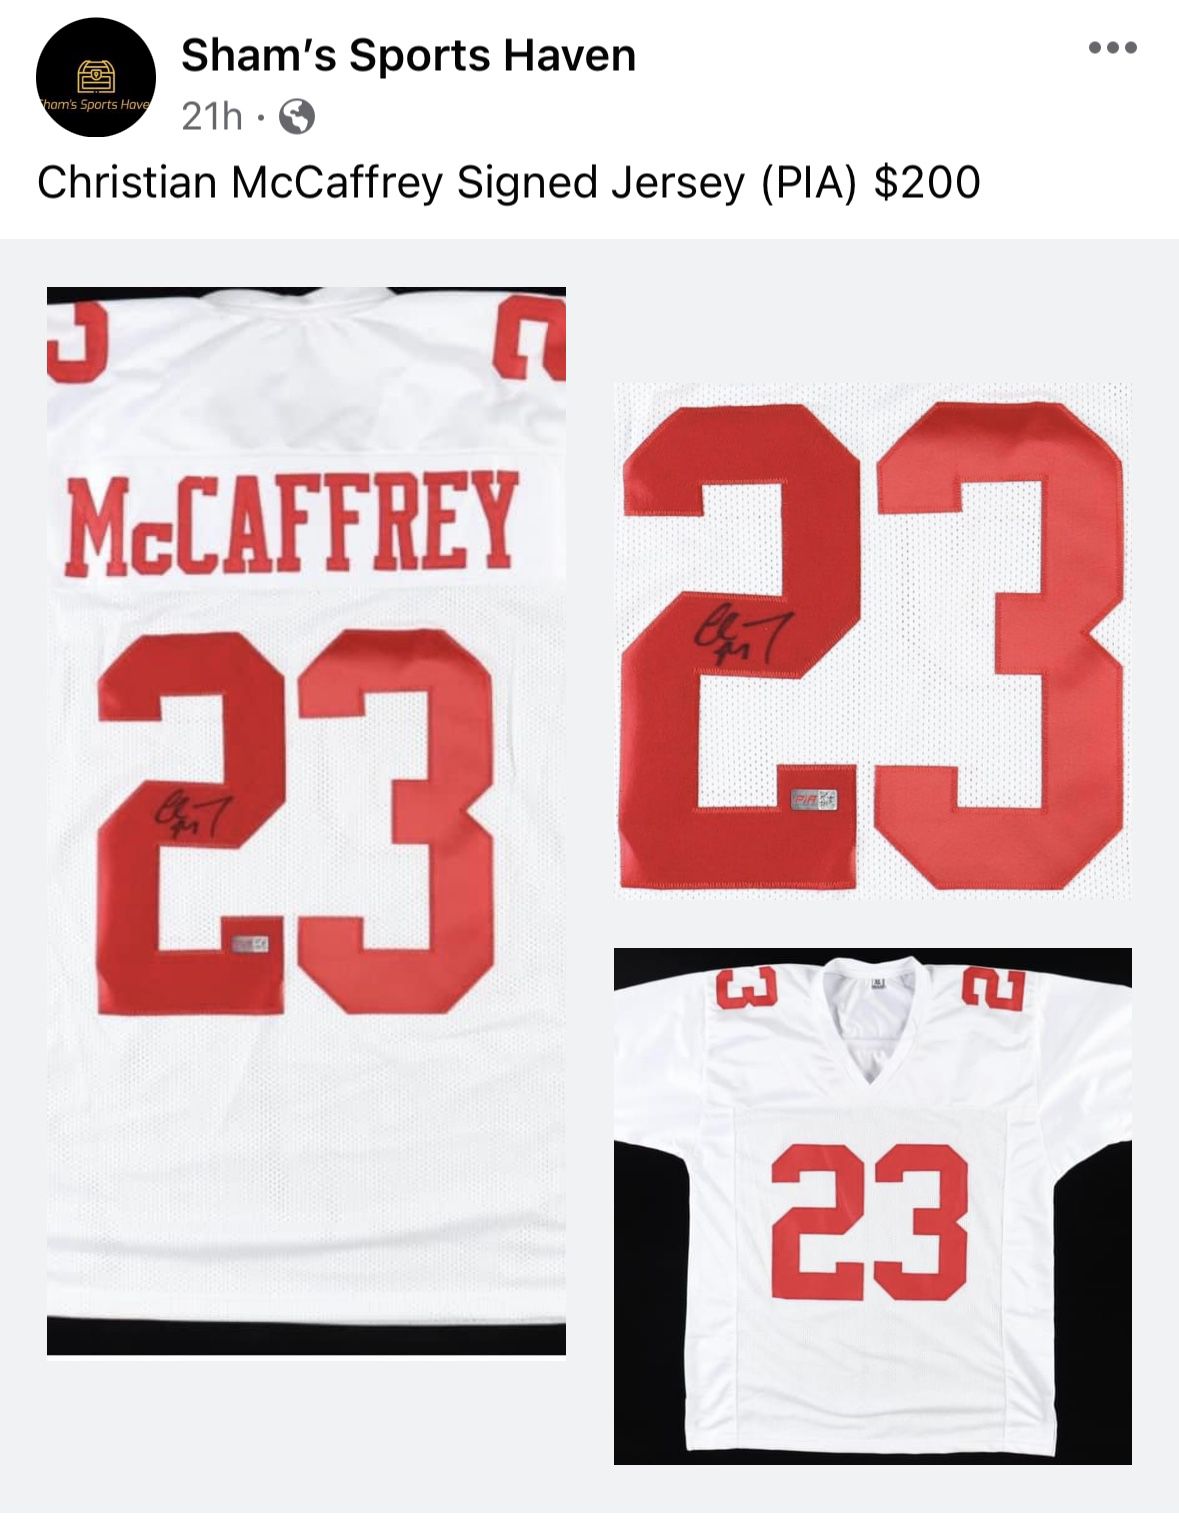 Christian McCaffrey Signed Jersey ) $200 for Sale in Fresno, CA - OfferUp